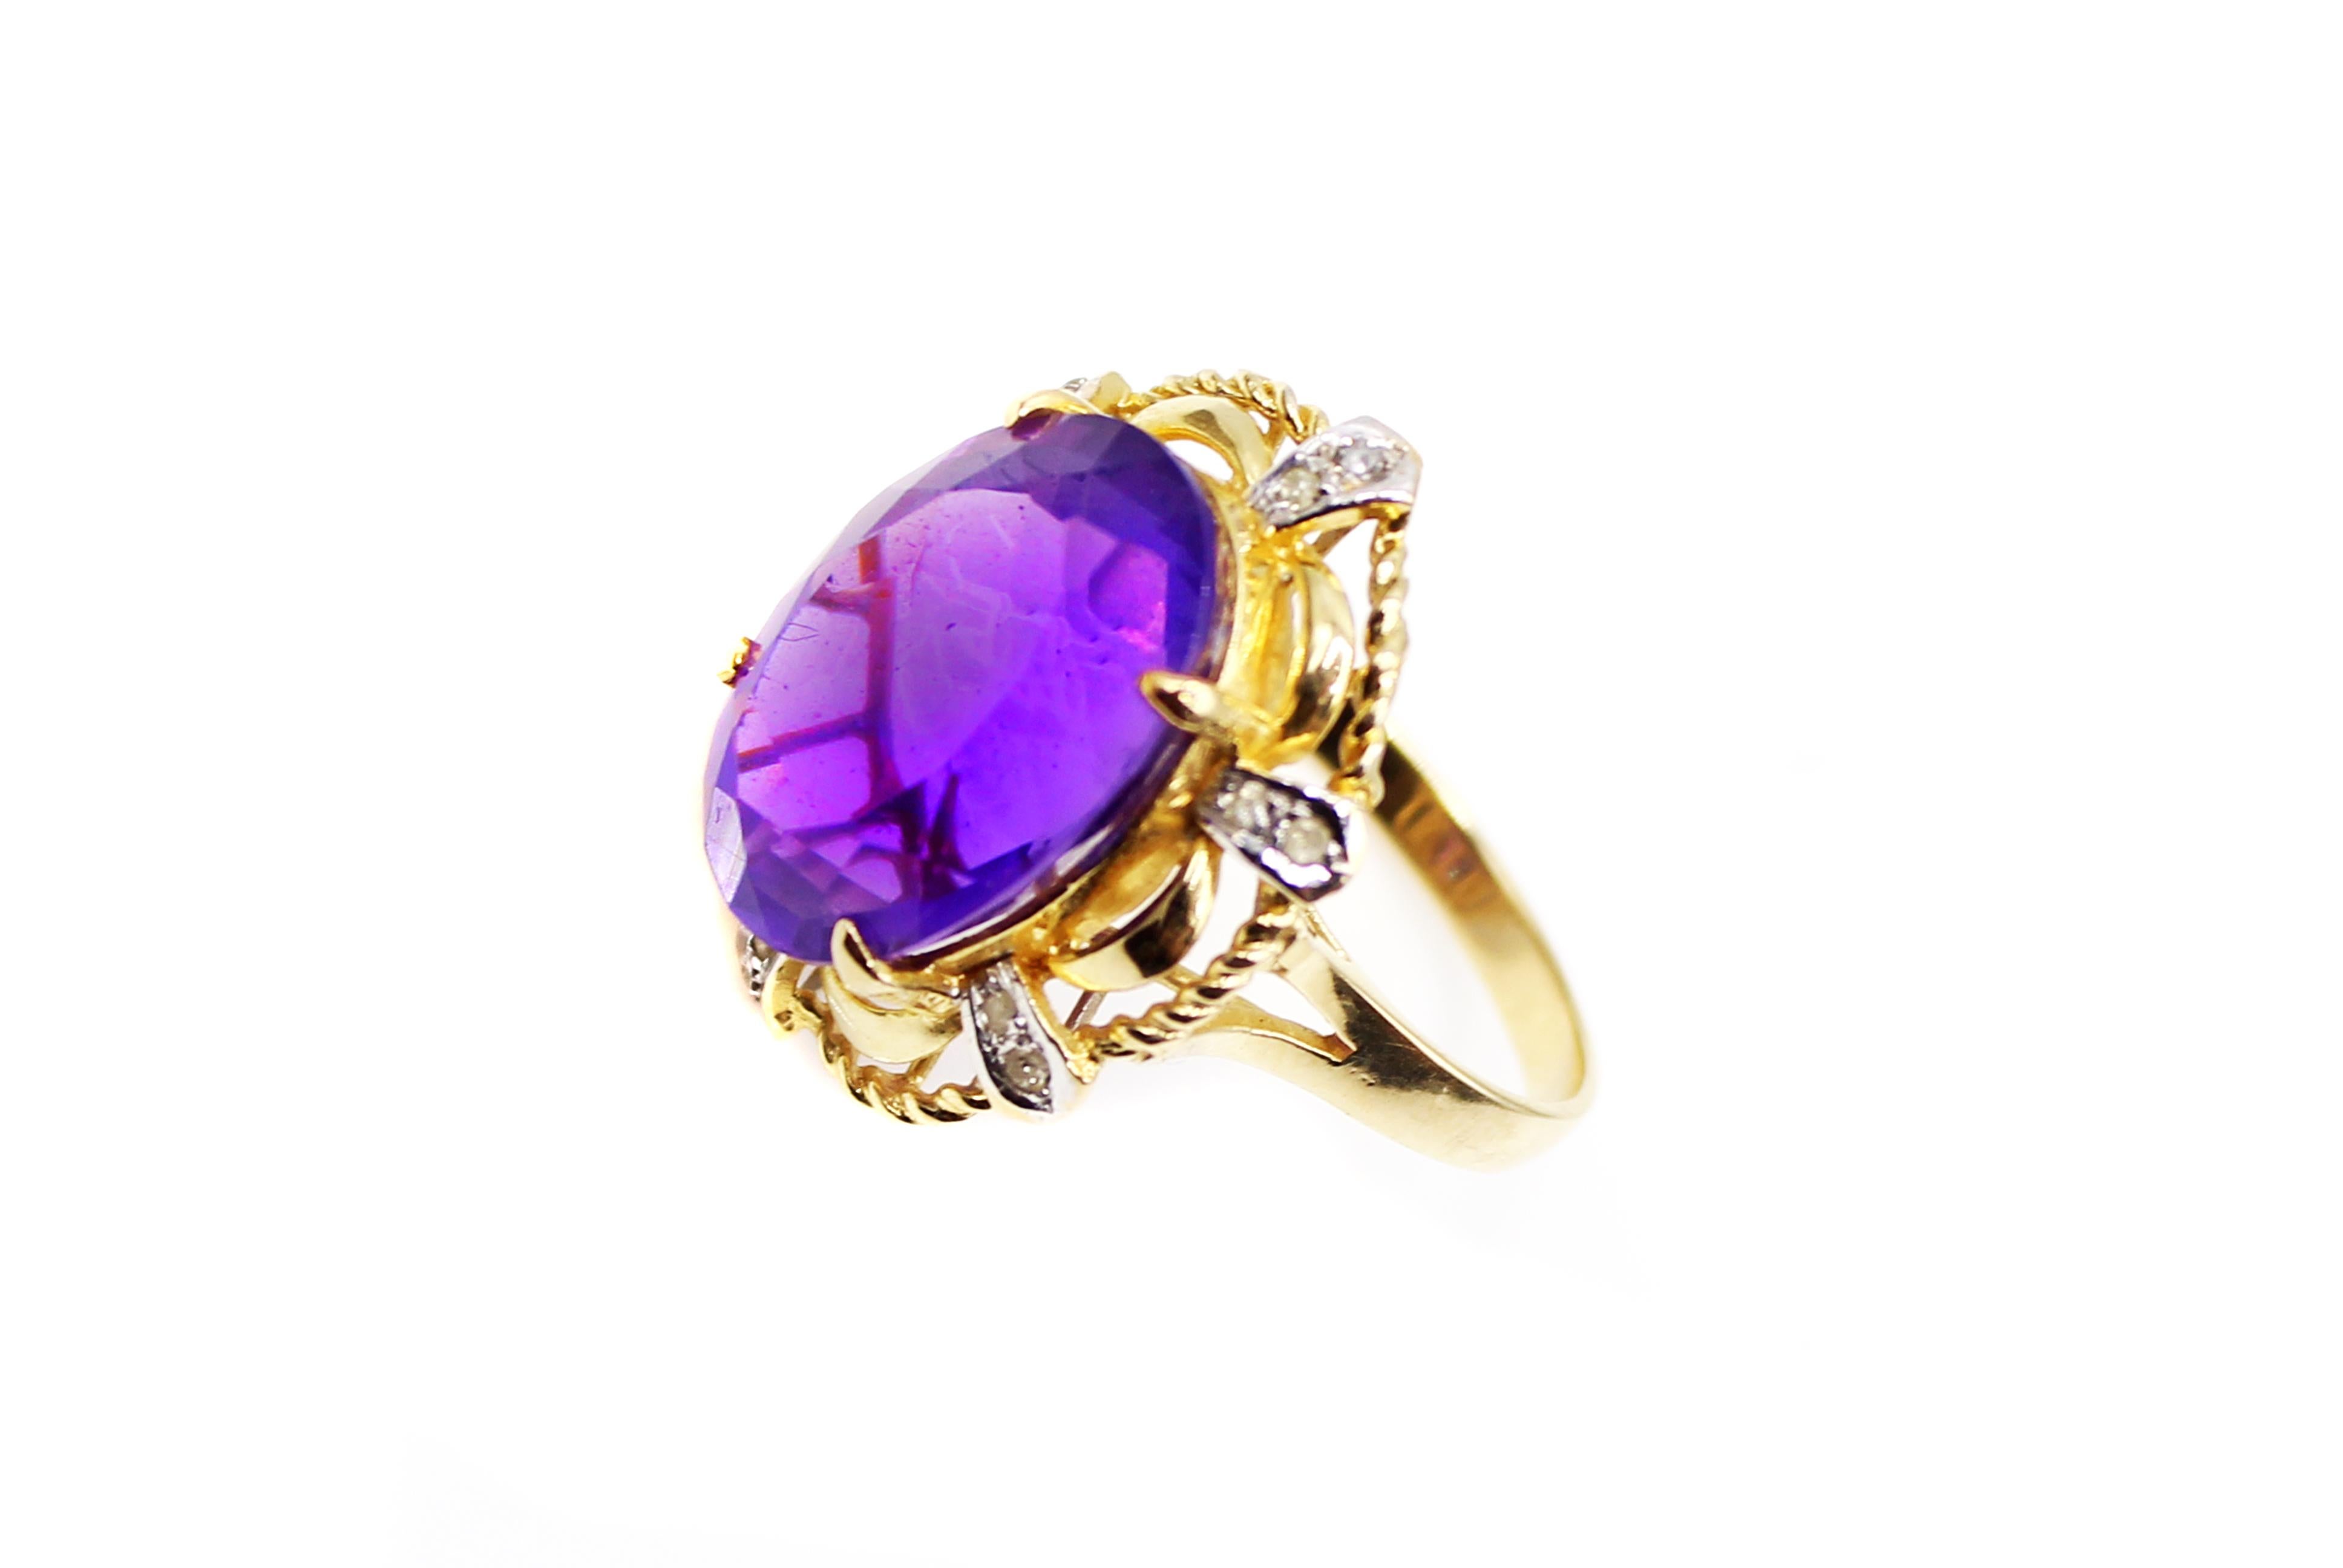 Vibrant deep purple oval cut amethyst centrally prong set surrounded by 12 small diamonds. The amethyst has been measured to weigh approximately 7.5 carats. The beautiful hand-crafted mounting was designed with 6 scallop-shaped sections of polished